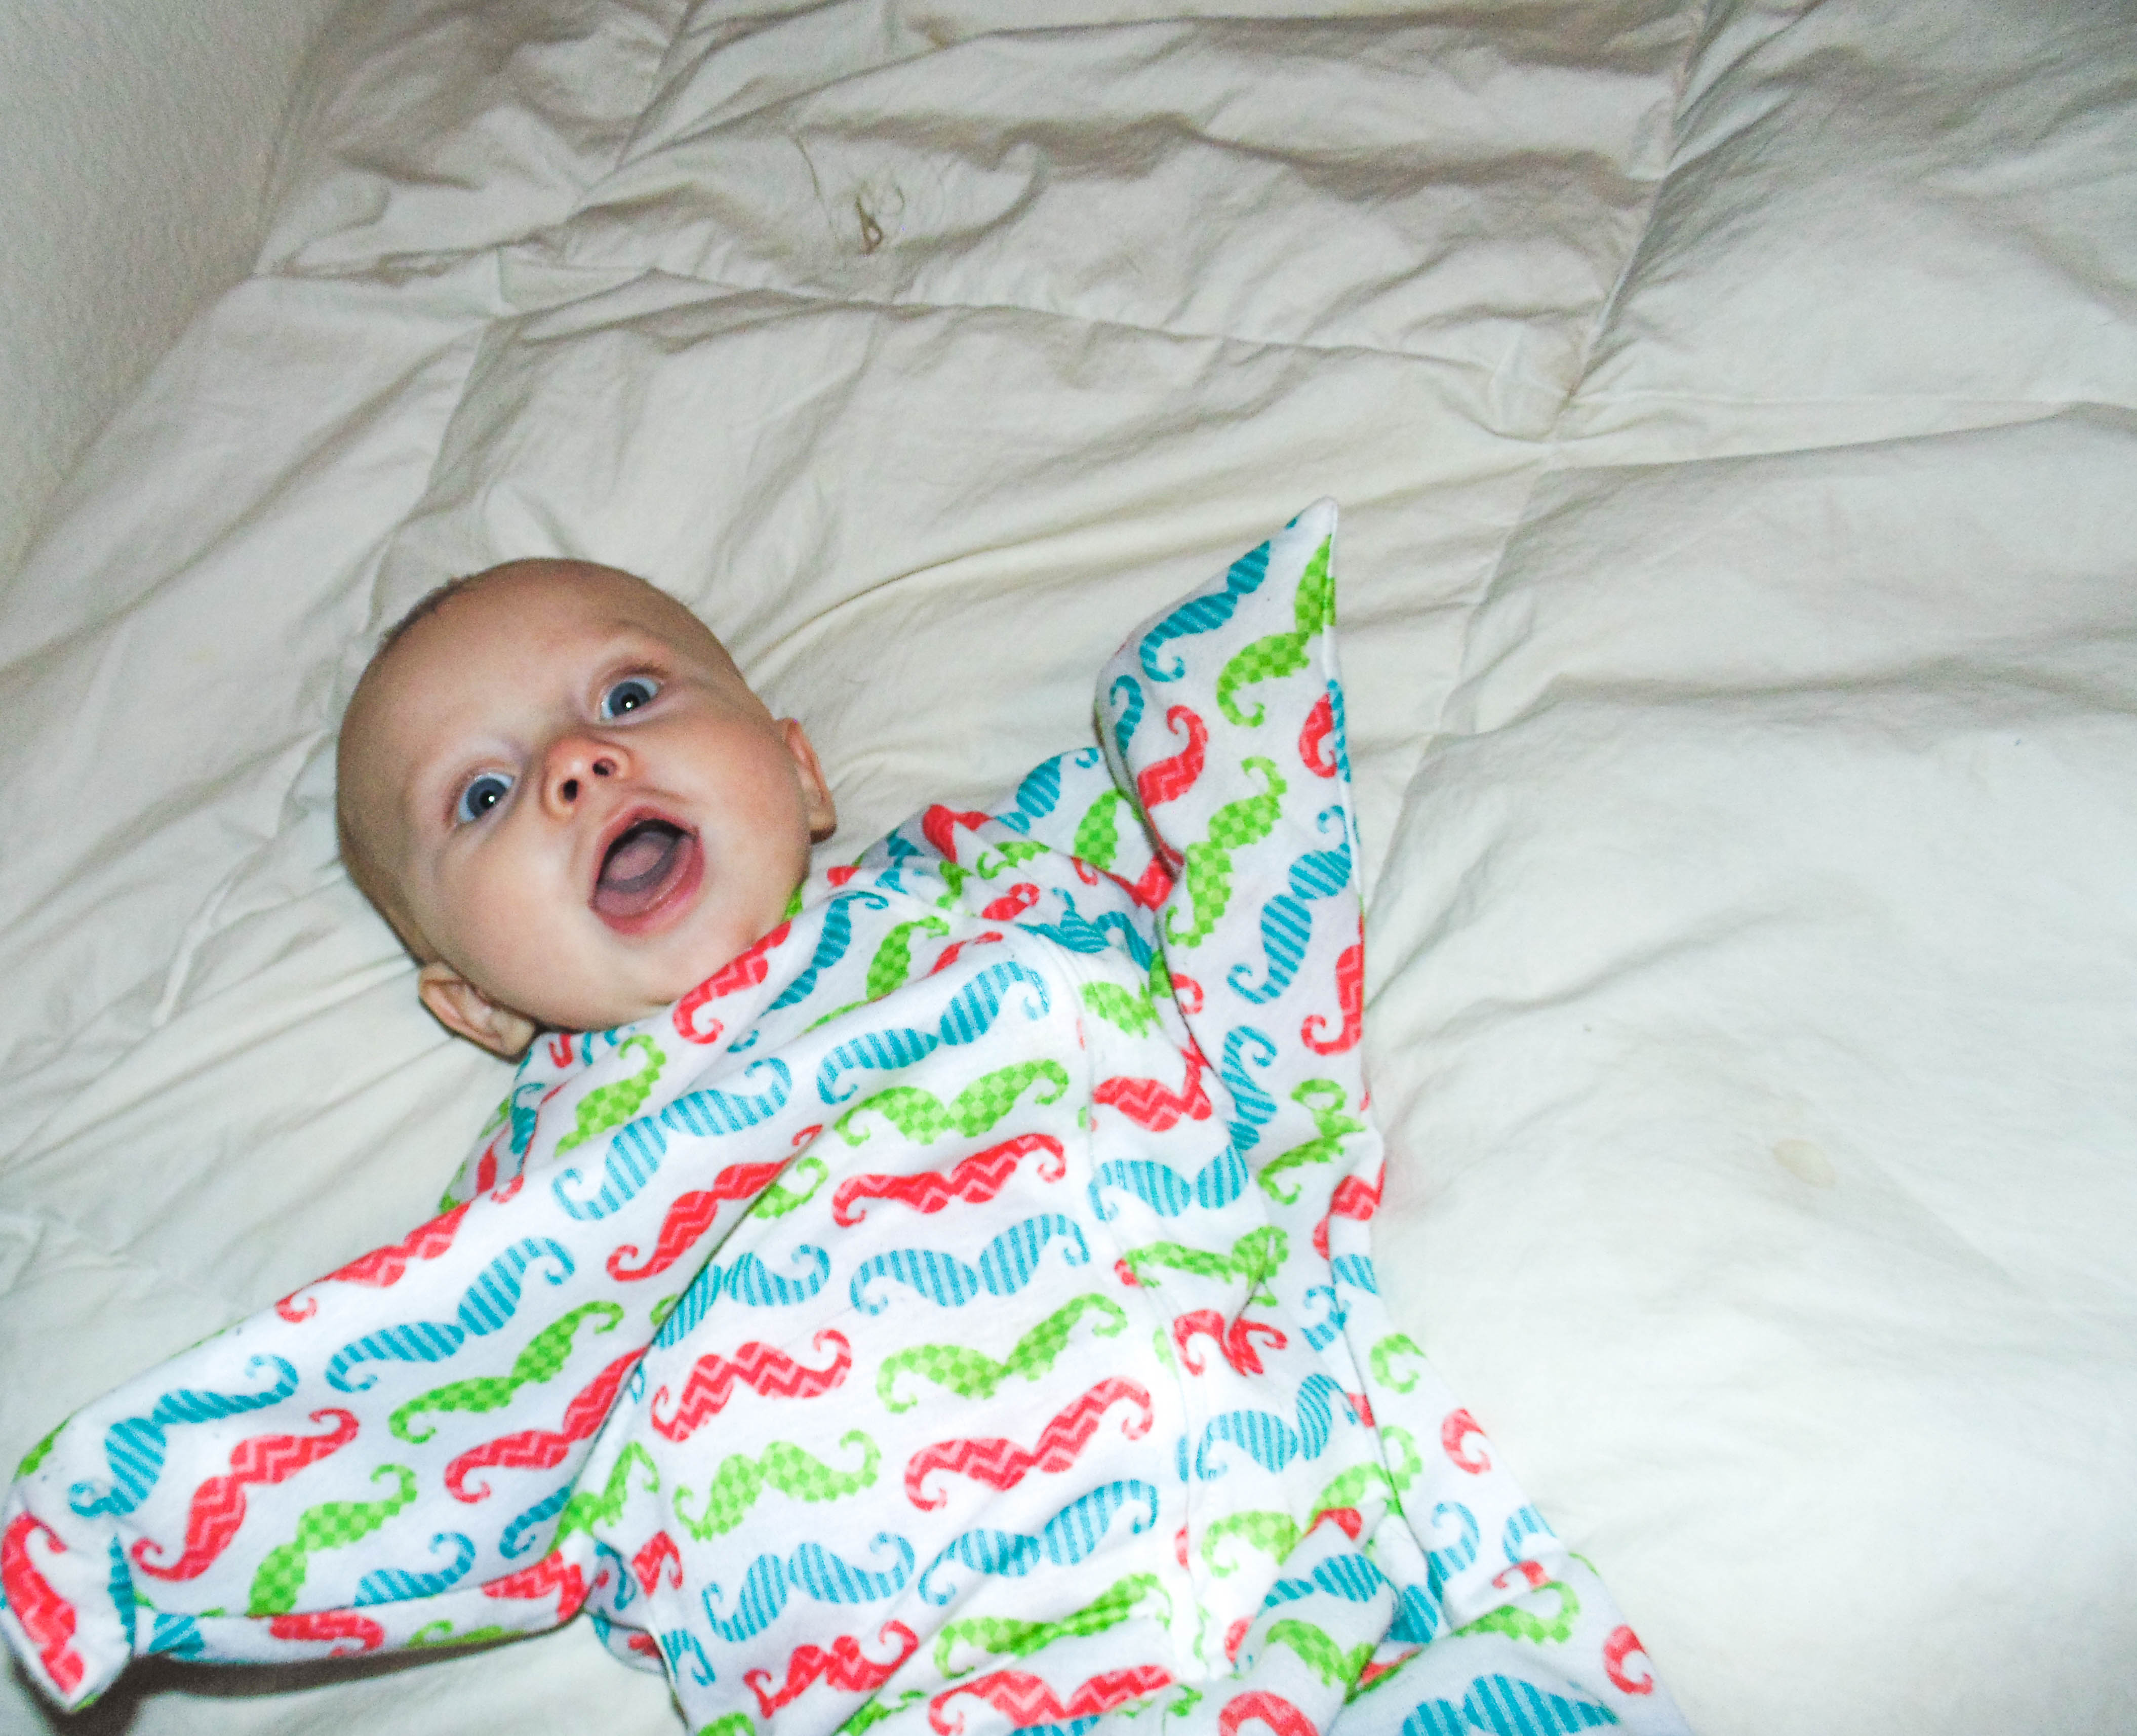 Swaddle transition tips with the Zipadee Zip swaddle featured by popular Denver life and style blogger, All Things Lovely